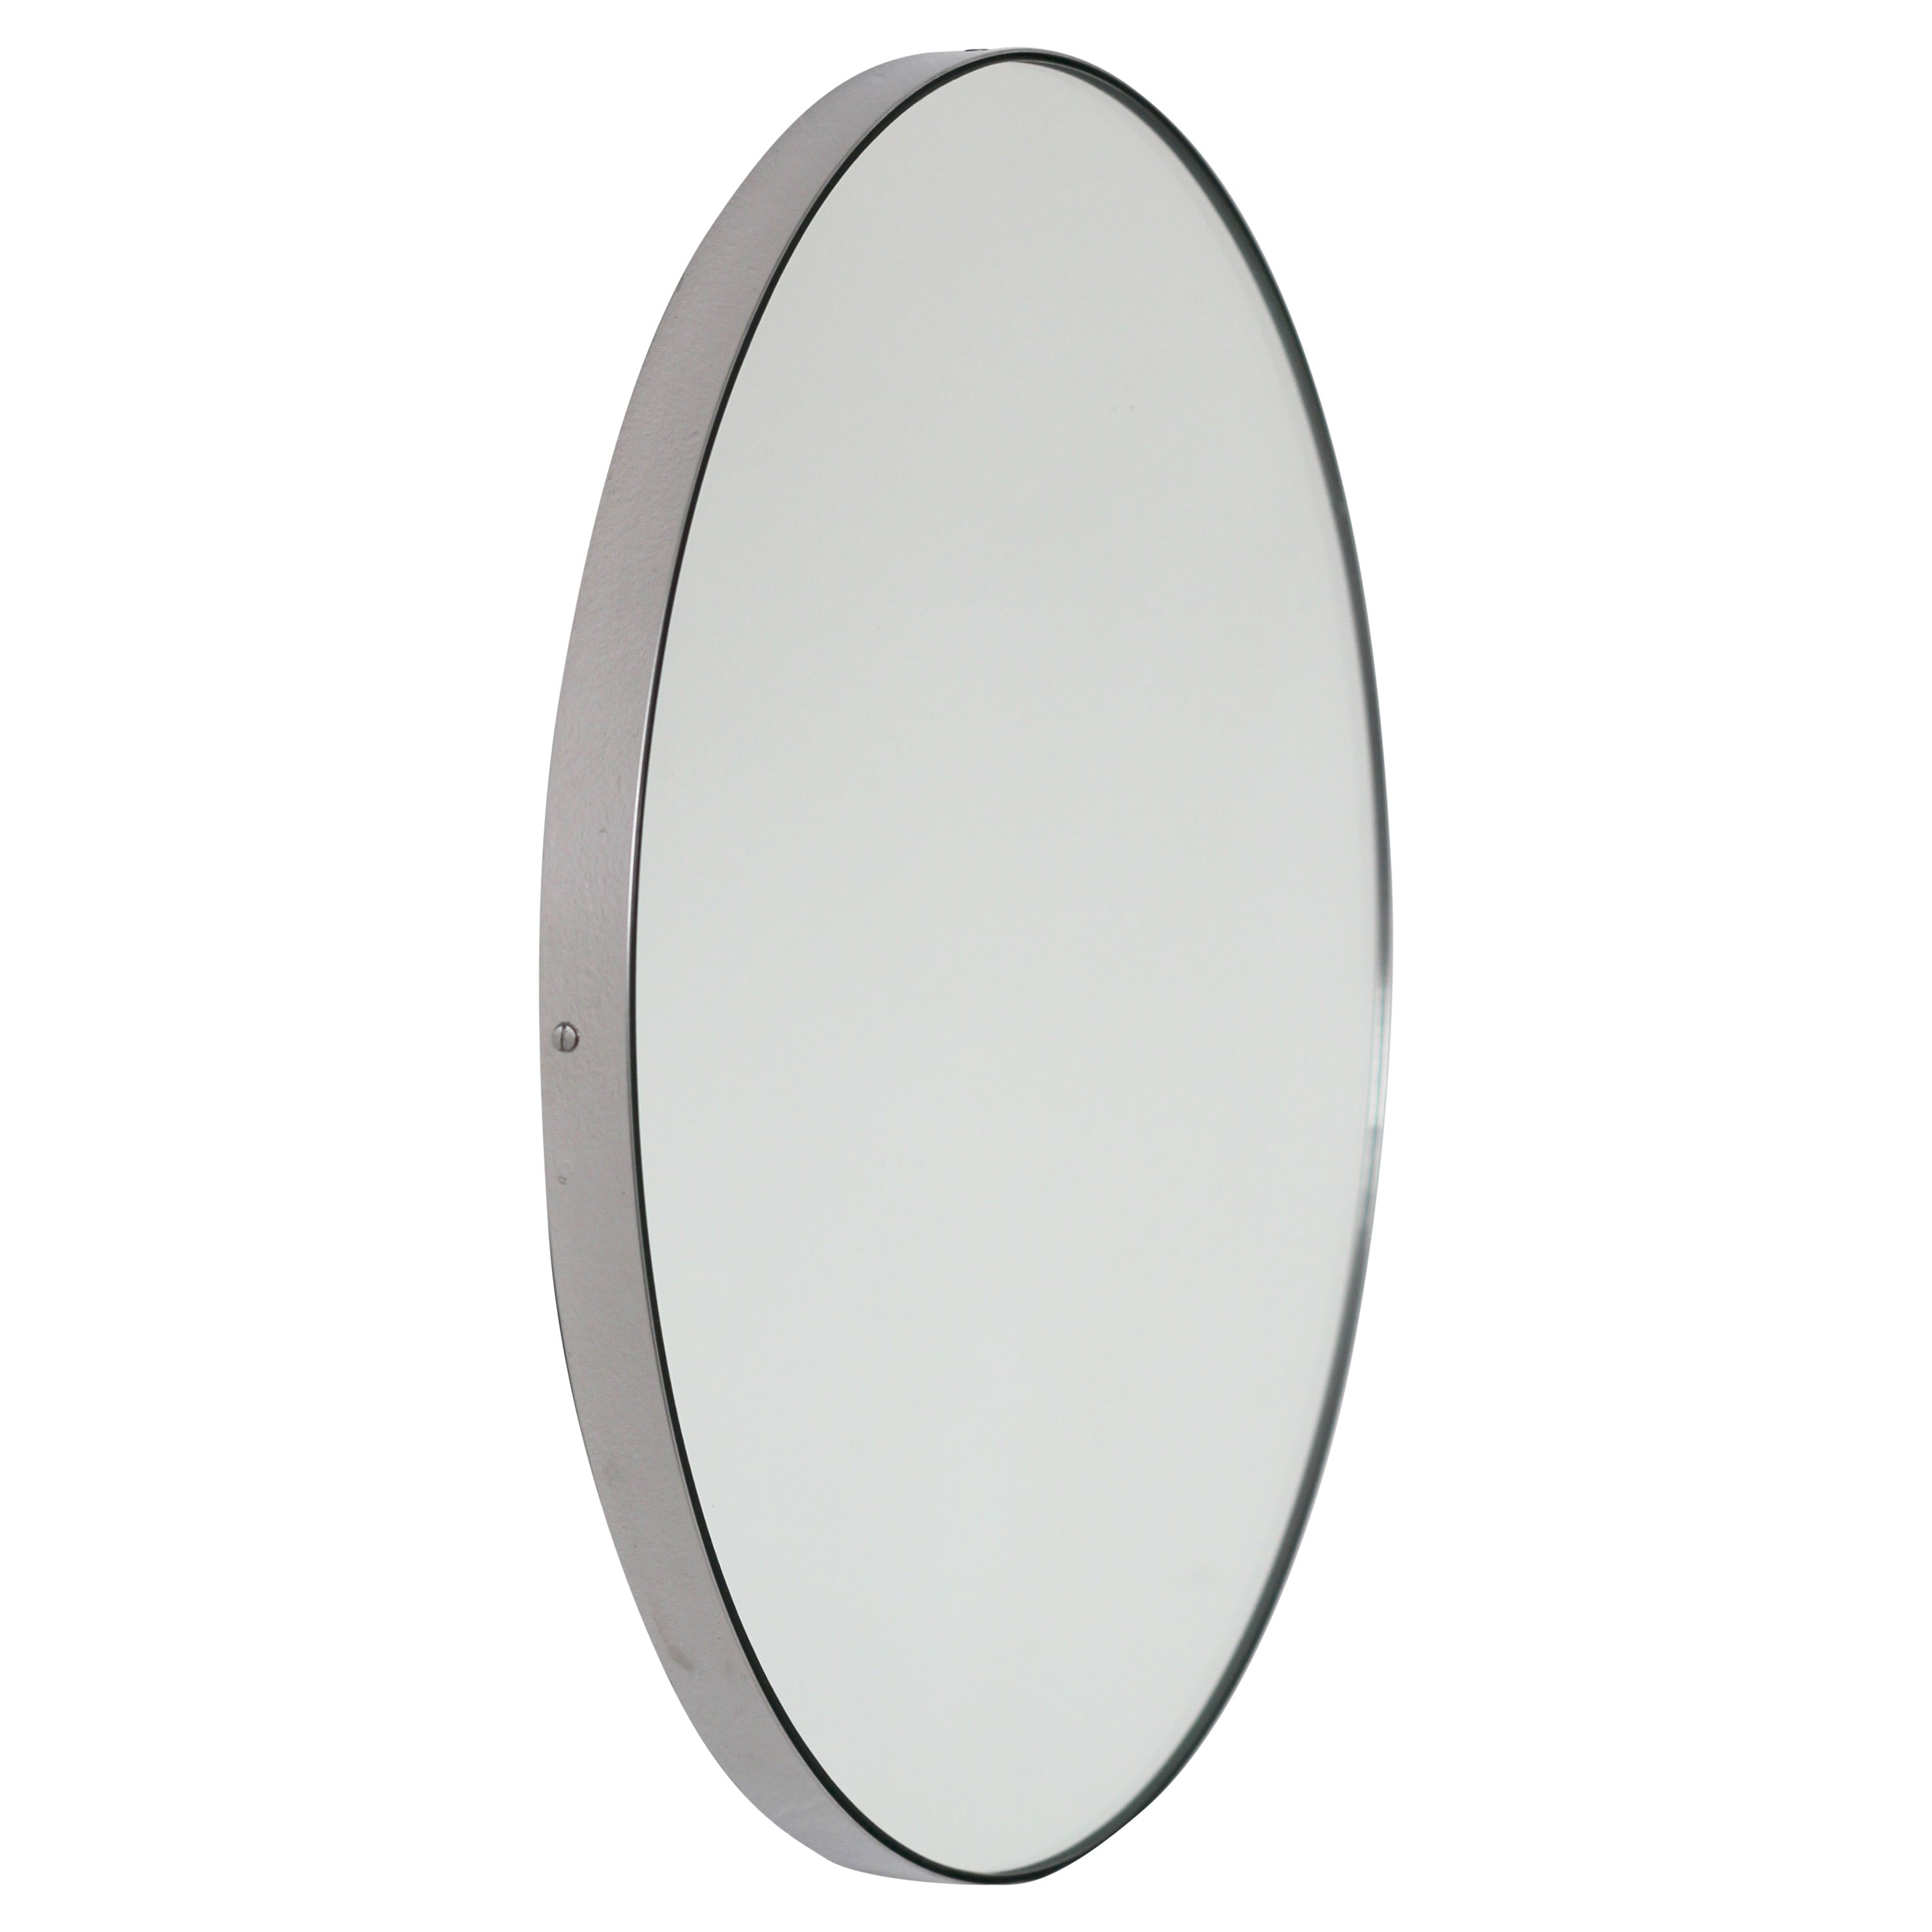 Orbis Round Handcrafted Mirror with Stainless Steel Frame, Large For Sale